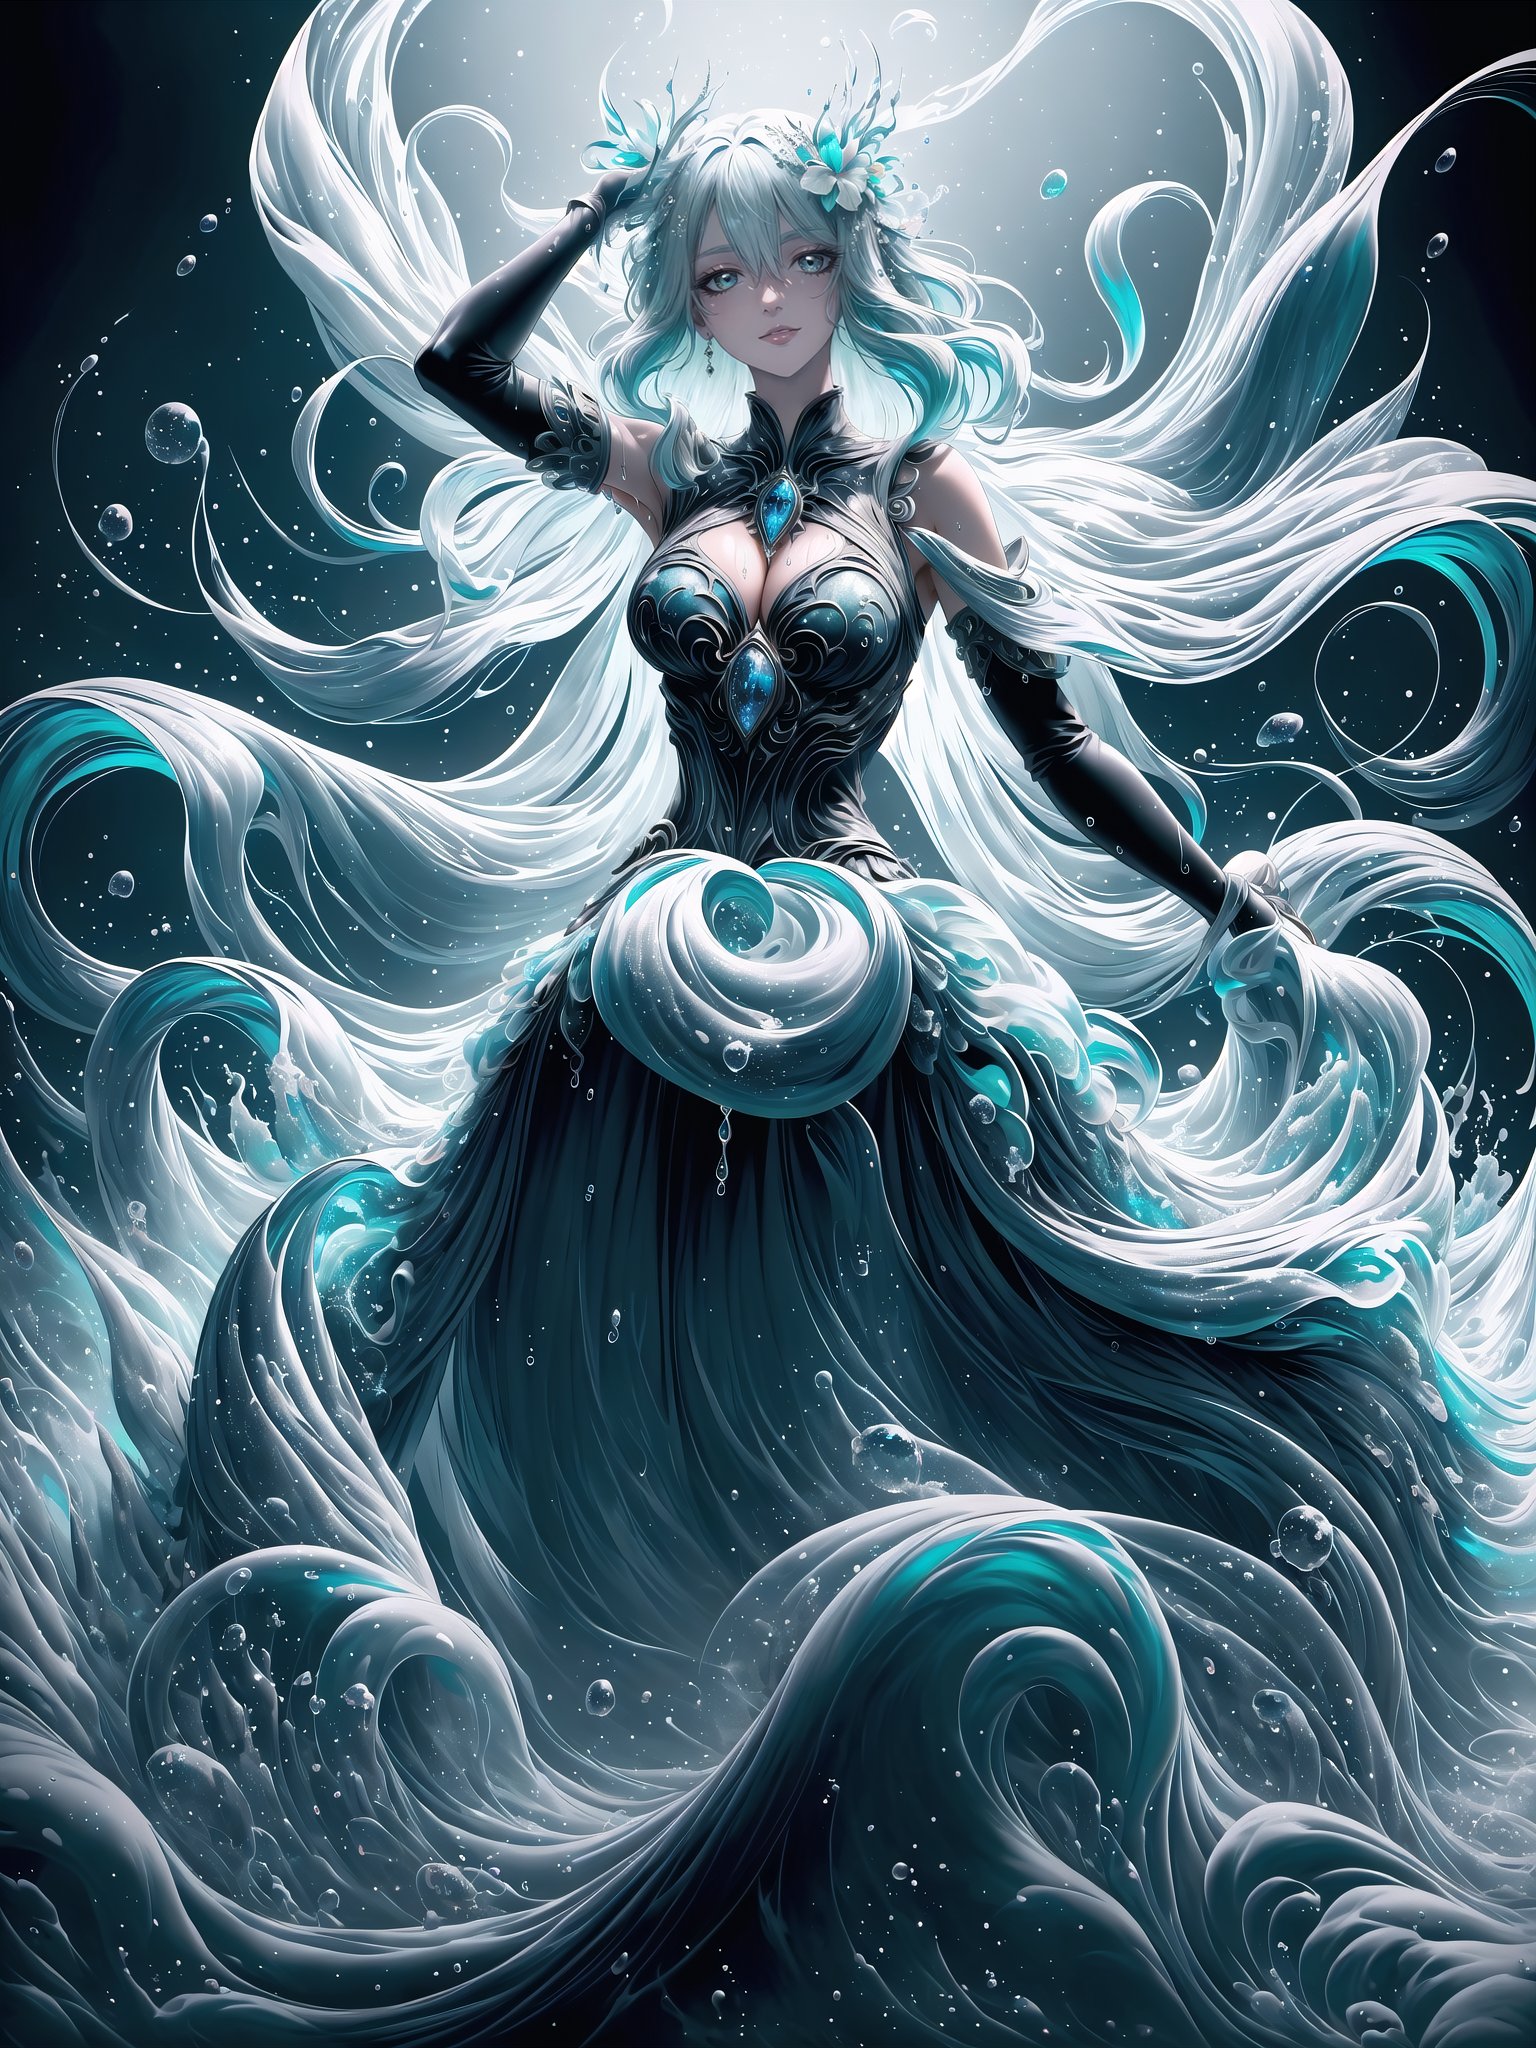 (Masterpiece,  Best Quality),  insaneres,  (8k resolution),  stylish,  (fantasy:1.1),  graphite (medium),  large breasts,  water droplets,  caustics,  liquid dress,  glowing,  bloom,  wind lift,  (ultra-detailed portrait),  (cowboy shot:1.2),  focus face,  small details,  motion blur,  fodress,  mermaid dress,  (flowing dress:1.2),  see-through,  (official alternate hairstyle,  embroidery,  (highly detailed:1.2),  (very long hair,  wavy hair:1.1),  ocean hair,  (water:1.2),  gown,  (wave print),  floral print,  reflective eyes,  sapphire eyes,  (hair between eyes,  bangs:1.1),  glowing eyes,  black pupil,  splashing,  wind lift,  turning,  (detailed face,  detailed eyes:1.2),  (aqua dress),  perfect female aqua hair,  two-tone hair,  white hair,  (bubble,  iridescent:1.2),  refraction,  swirling hair,  swirl,  figure,  hourglass figure,  thick waist,  wide hips,  contrapposto,  blue sky,  (cloud:1.3),  (intricate details:1.2),  upper bodlight smile,  (floatig hair:1.1),  (looking at viewer),  expressive,  lively,  glitter, glossy,  sparkle,  blue and white theme:1.3),  (deep depth of field),  sharp focus,  (shiny:1.3),  (casting spell),  arms up,  nail polish,  detached sleeves,  white gloves,  arcane,  backlighting,  magical,  highlights,  (one leg up:1.1),  arched_back,  leaning back,  looking up,  (floating:1.1),  magic,  dreamy,  white trim,  shadow,  (dramatic lighting:1.2),  (mature female:1.2),  seductive pose,  cleavage,  aged up,  (Adult), see-through sleeves,  shawl,  dramatic scene,  (cinematic:1.1),  volumetric lighting,  sunny,  day,  outdoors,  surreal,  ffxivbg,  (rdial blur:0.3),  8k,  hyper detailed,  (extremely detailed:1.2),  ocean,  (details),  hyperrealistic,  film grain,  glisten,  glimmer,  colorful,  (vivid),  deep and rich colors,  (dynamic:1.2),  vibrant,  (soaked,  wet:1.2),  splash,  soft lighting,  soft makeup,  white hair,  (extremely detailed facial features),  shimmer,  jewels,  gradient dress,  white dress,  (perfect lighting and composition:1.1) , fiber optic dress,  dress made of water,  jewelry,  (hair ornament:1.1),  dress made of liquid,  (floating particles), WaterAI, , Rayearth,  (bokeh), fodress, <lora:EMS-50984-EMS:0.700000>, , <lora:EMS-48308-EMS:0.500000>, , <lora:EMS-11190-EMS:0.300000>, , <lora:EMS-7851-EMS:0.300000>, , <lora:EMS-28489-EMS:0.300000>